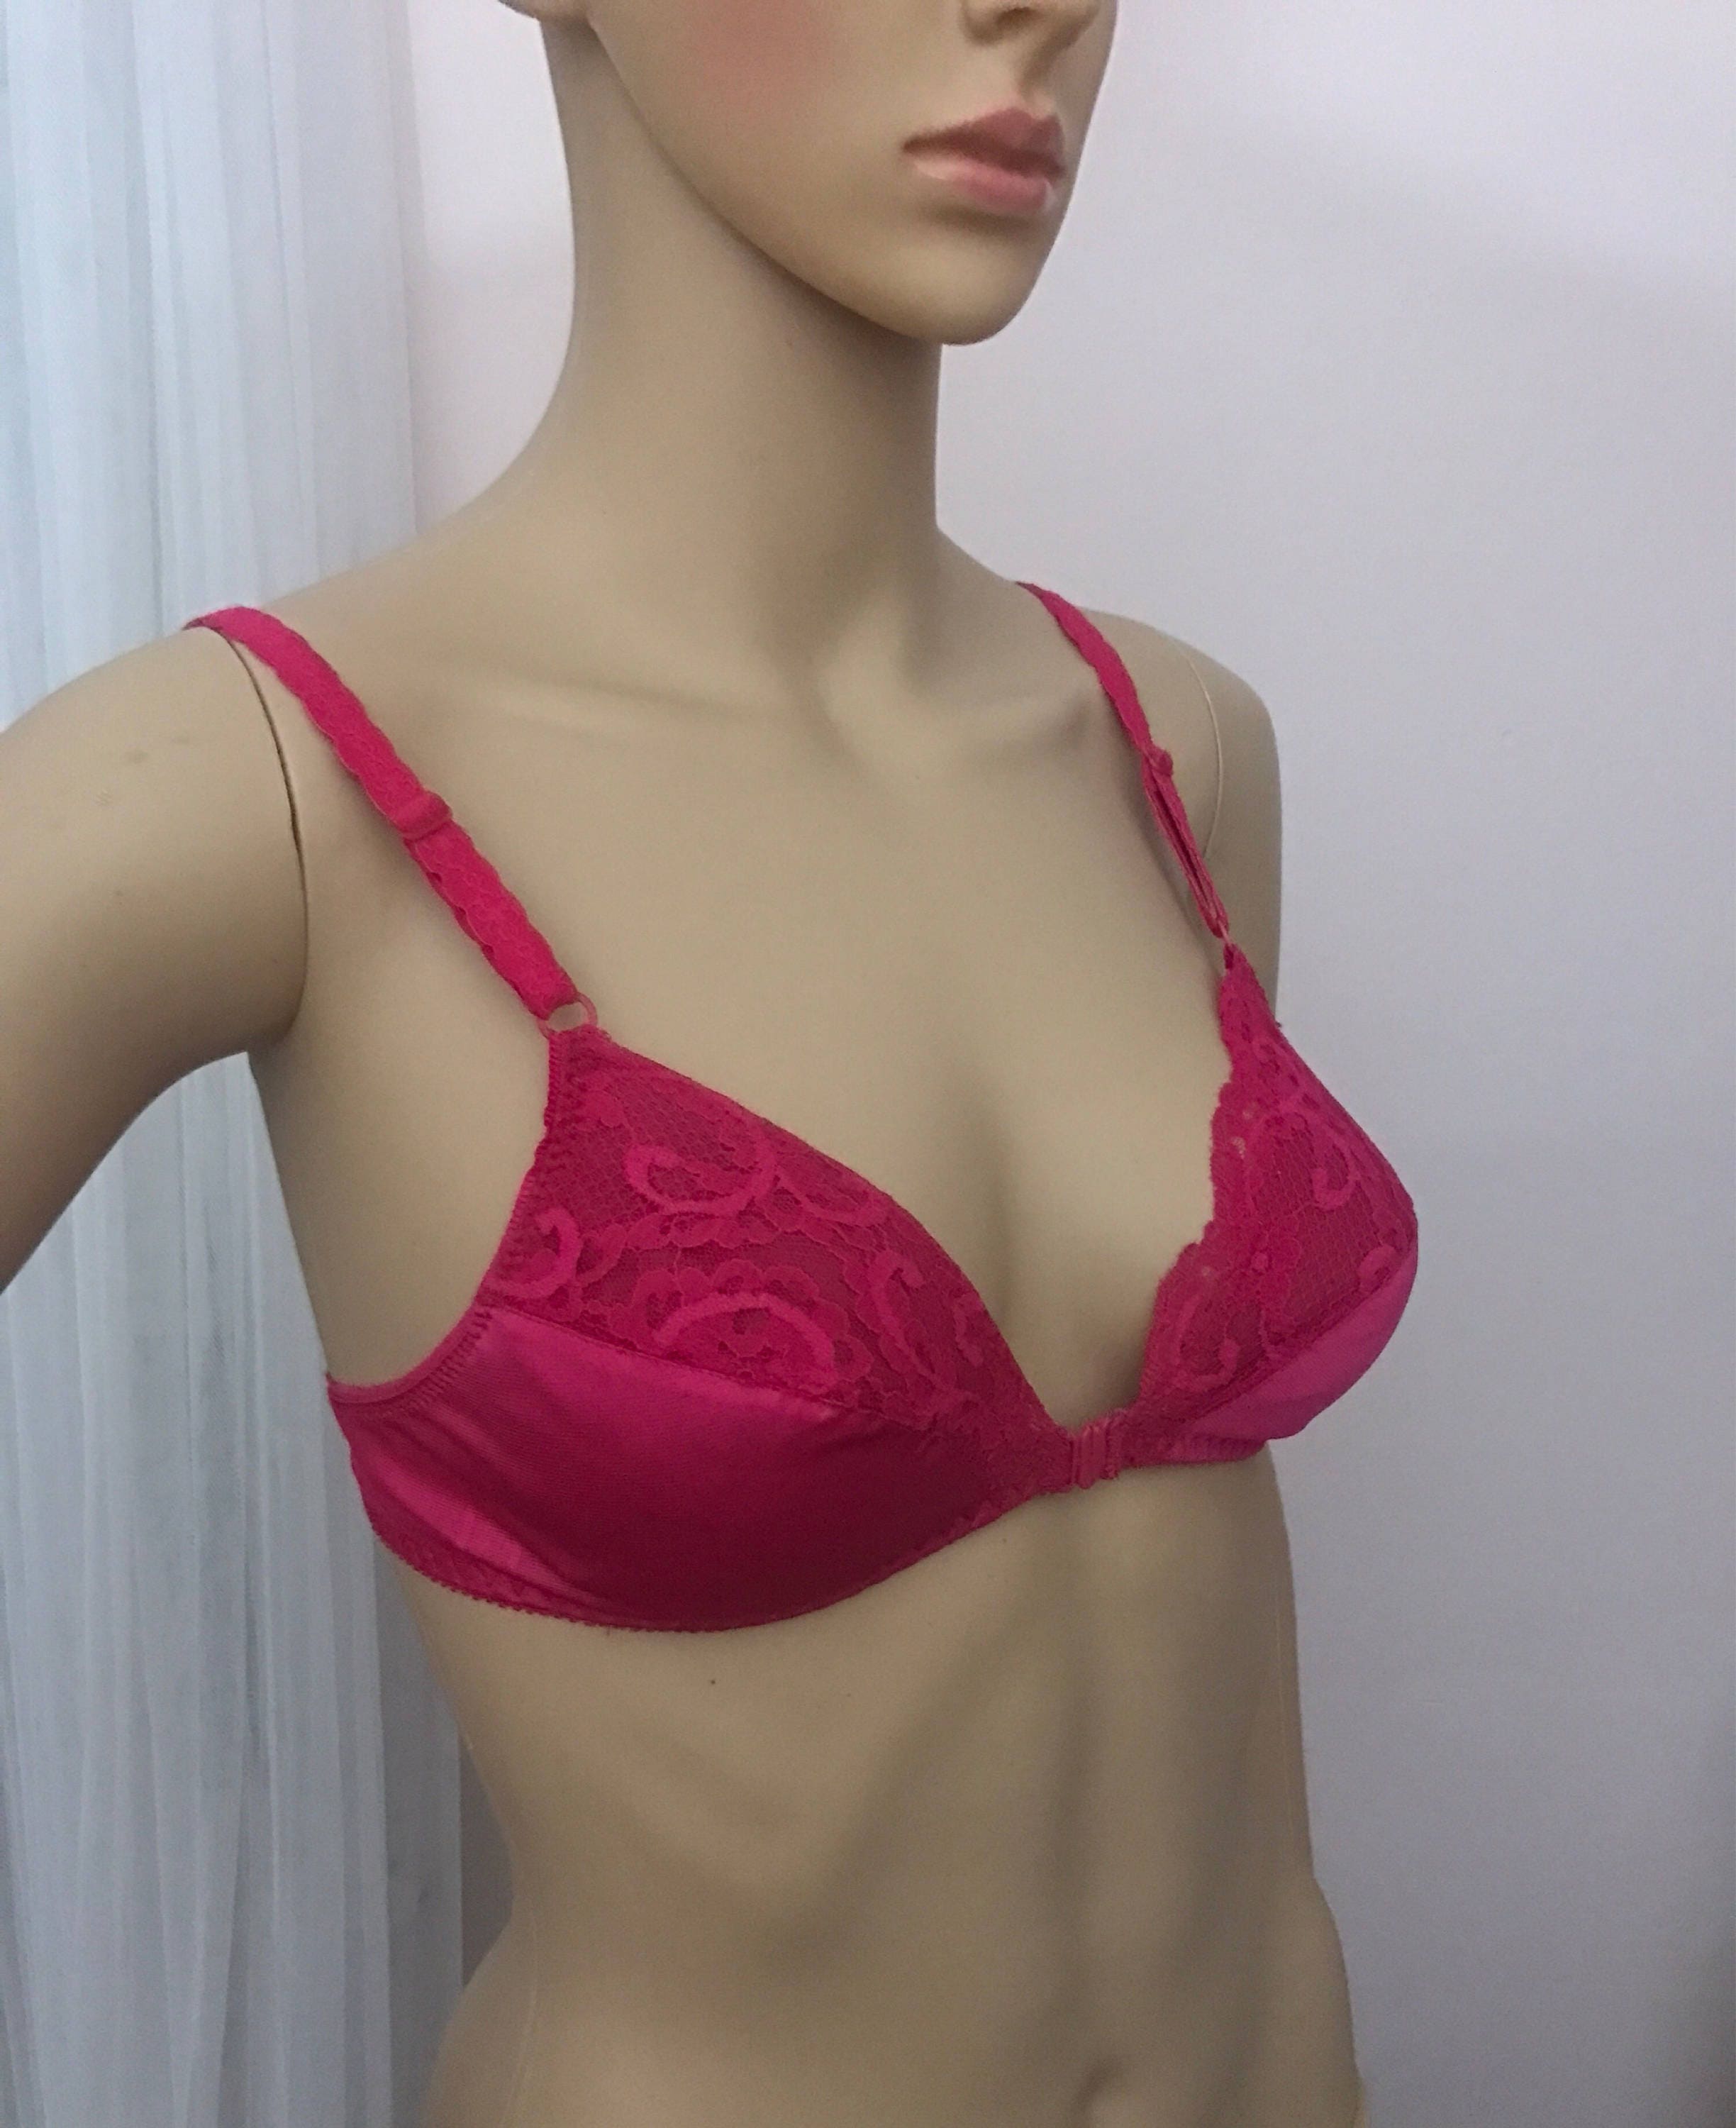 Vintage JCPenney Nice'N Spicy Antron III Nylon Soft Cup Lace Bra Front  Closure 32B 32 B Magenta Pink Wire Free / Penney's Nice 'n Spicy